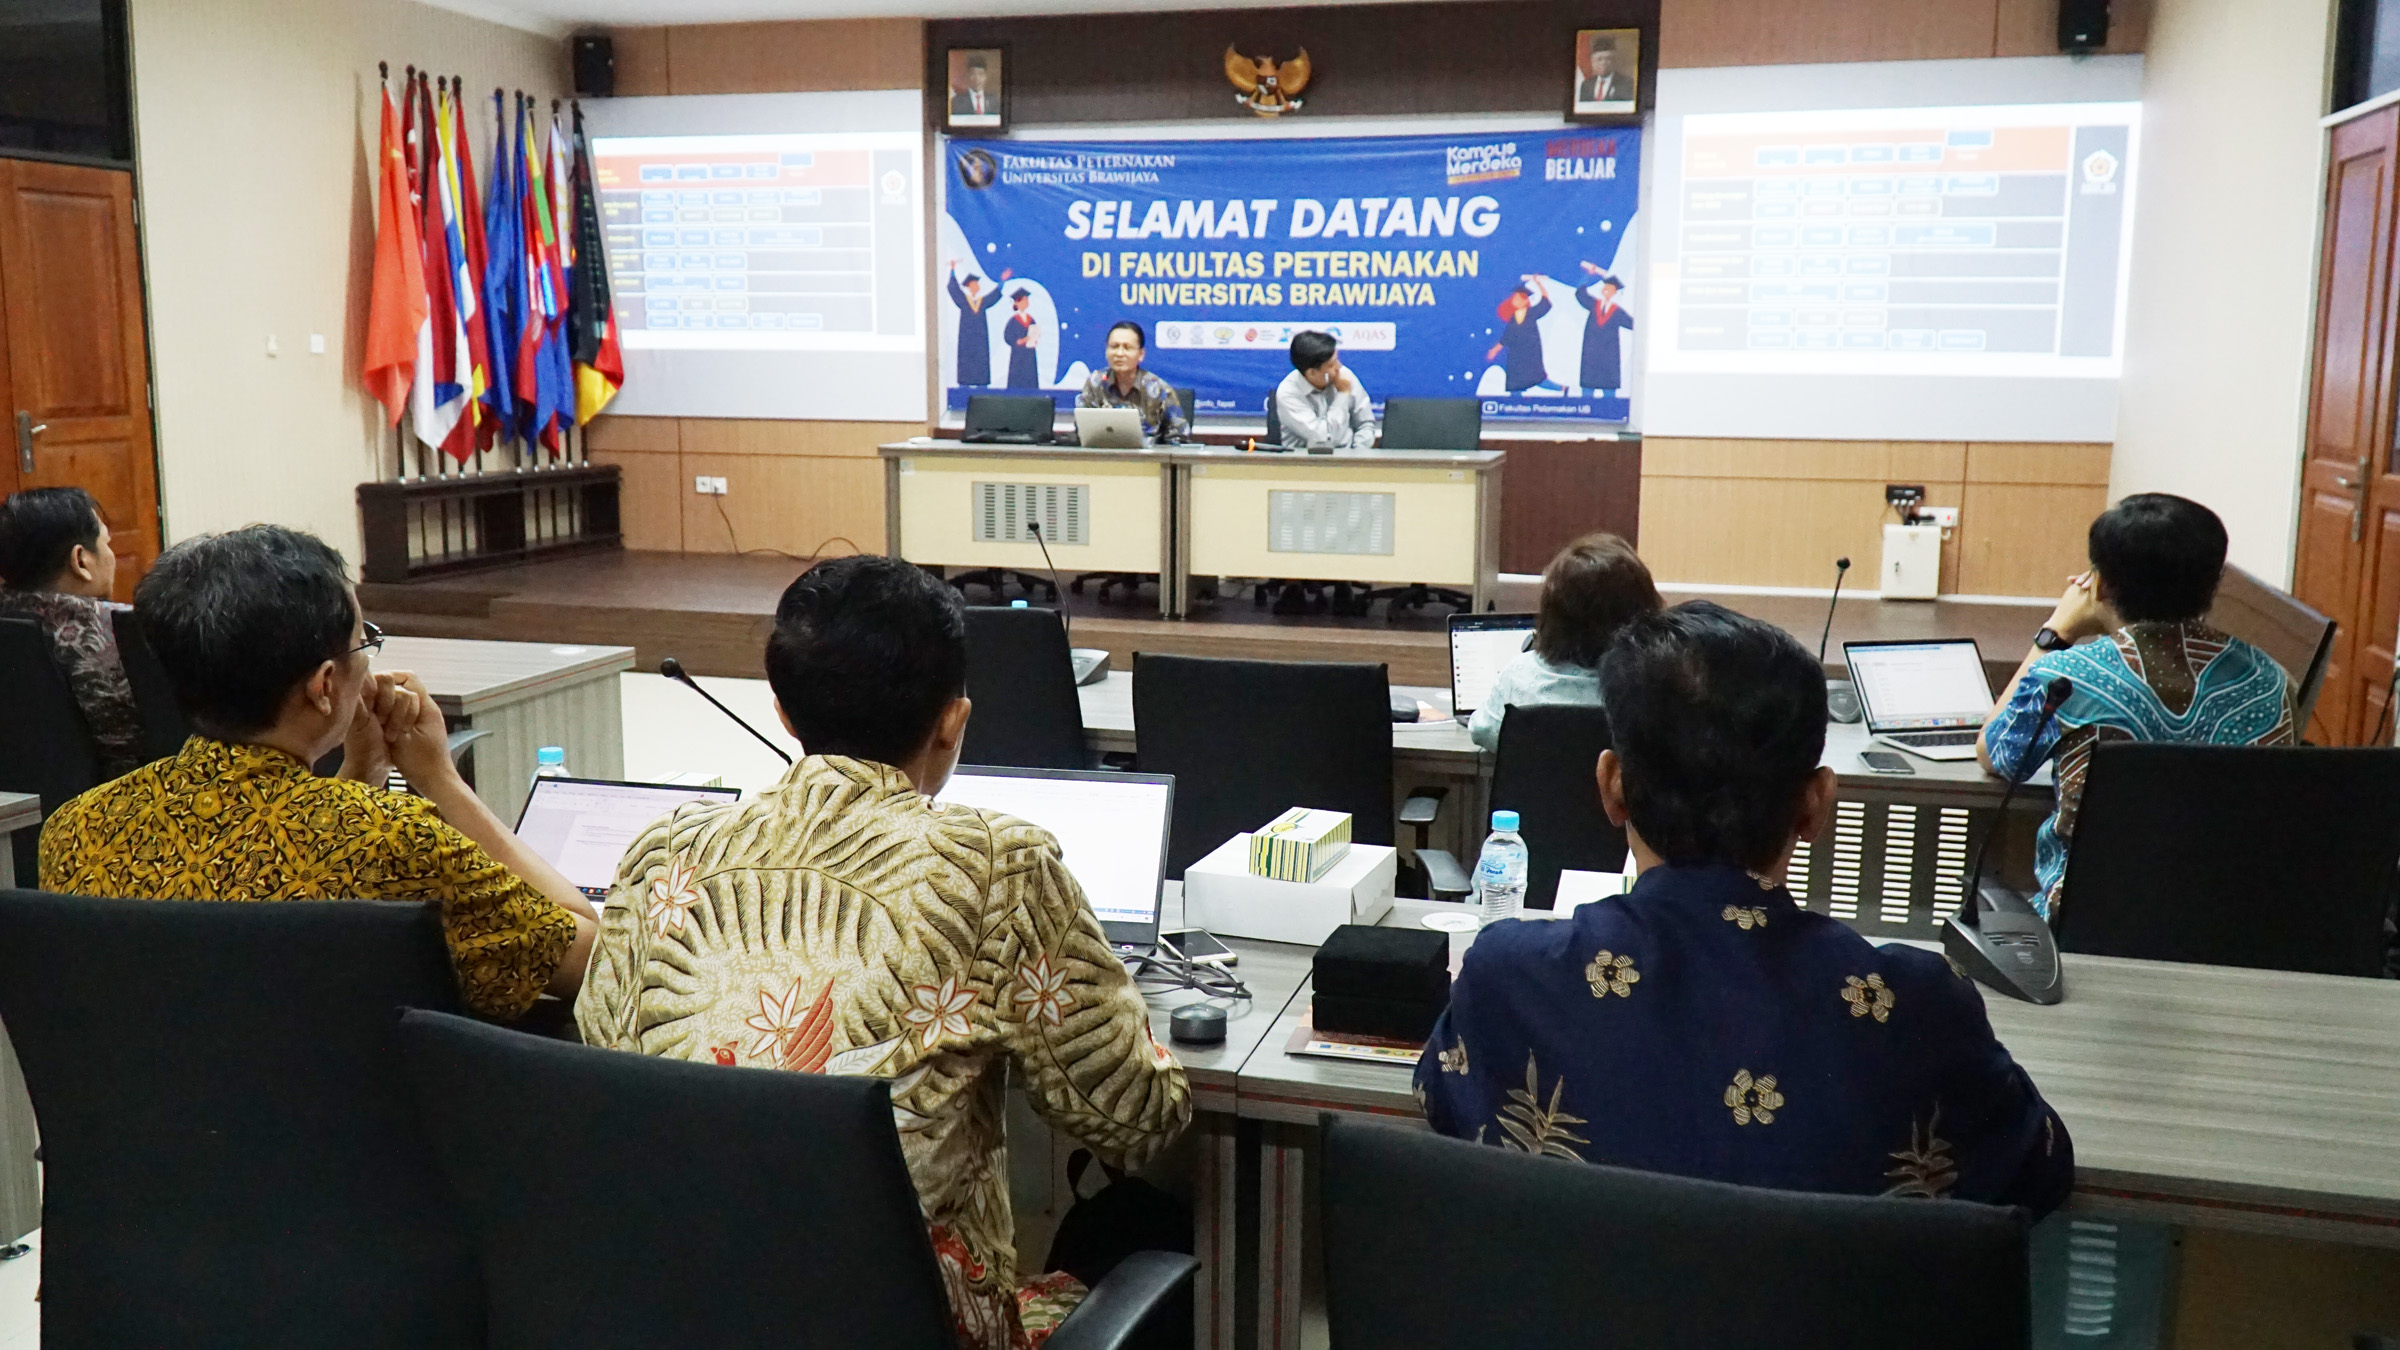 Faculty of Animal Science UB Welcomes Benchmarking Visit and Comparative Study of Faculty of Animal Science UGM Field of Academic Services